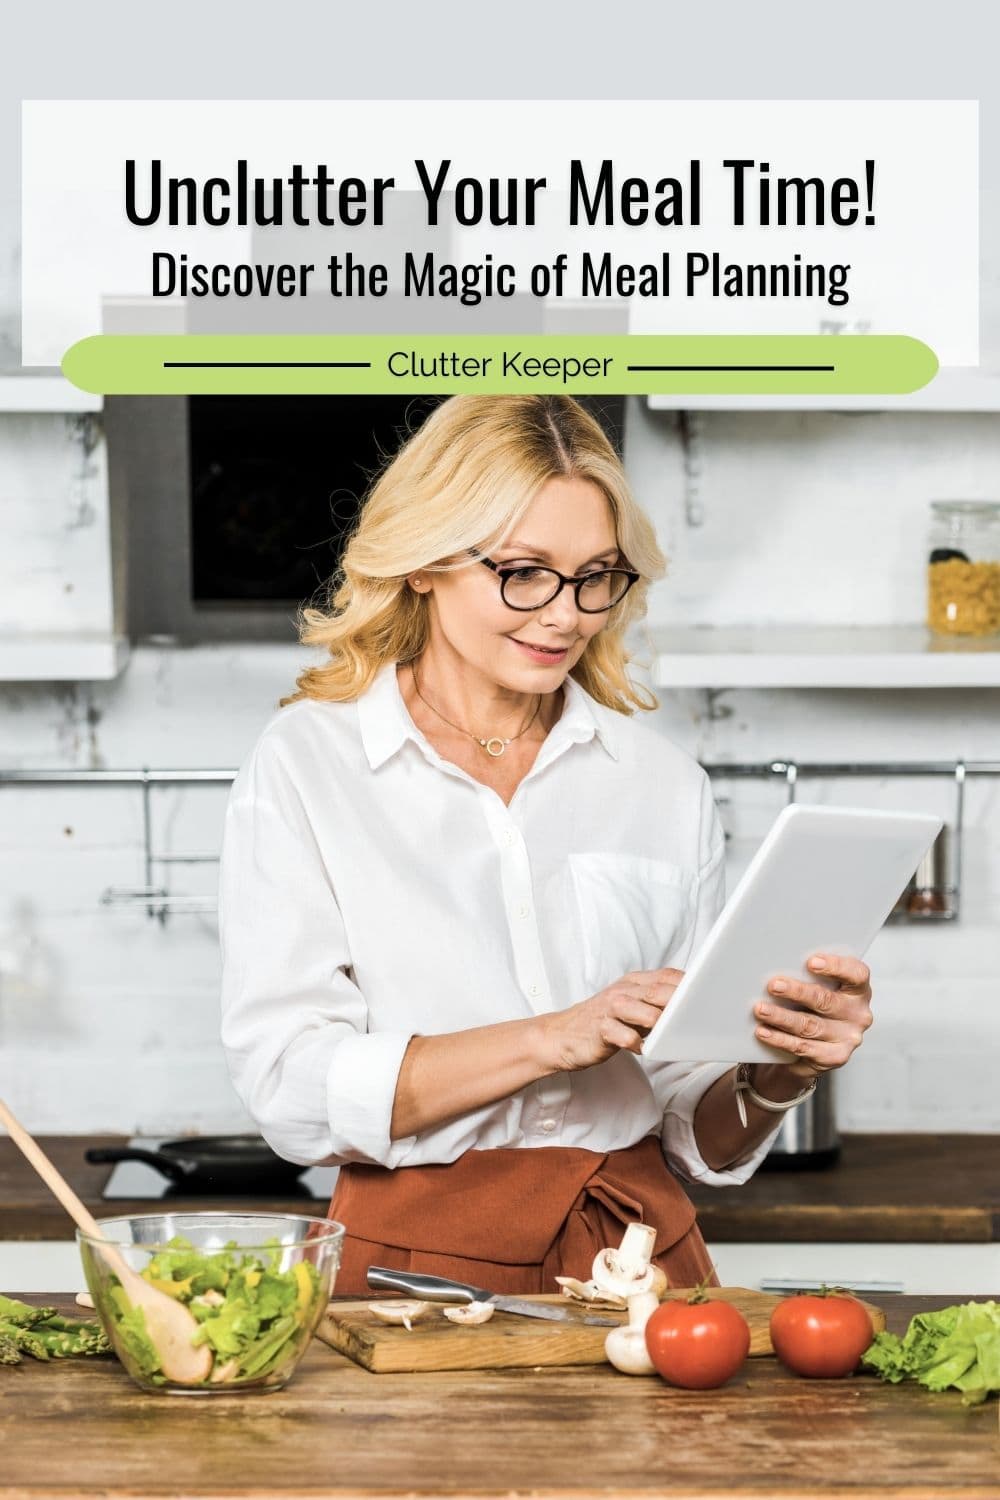 Unclutter your meal time. Discover the magic of meal planning.